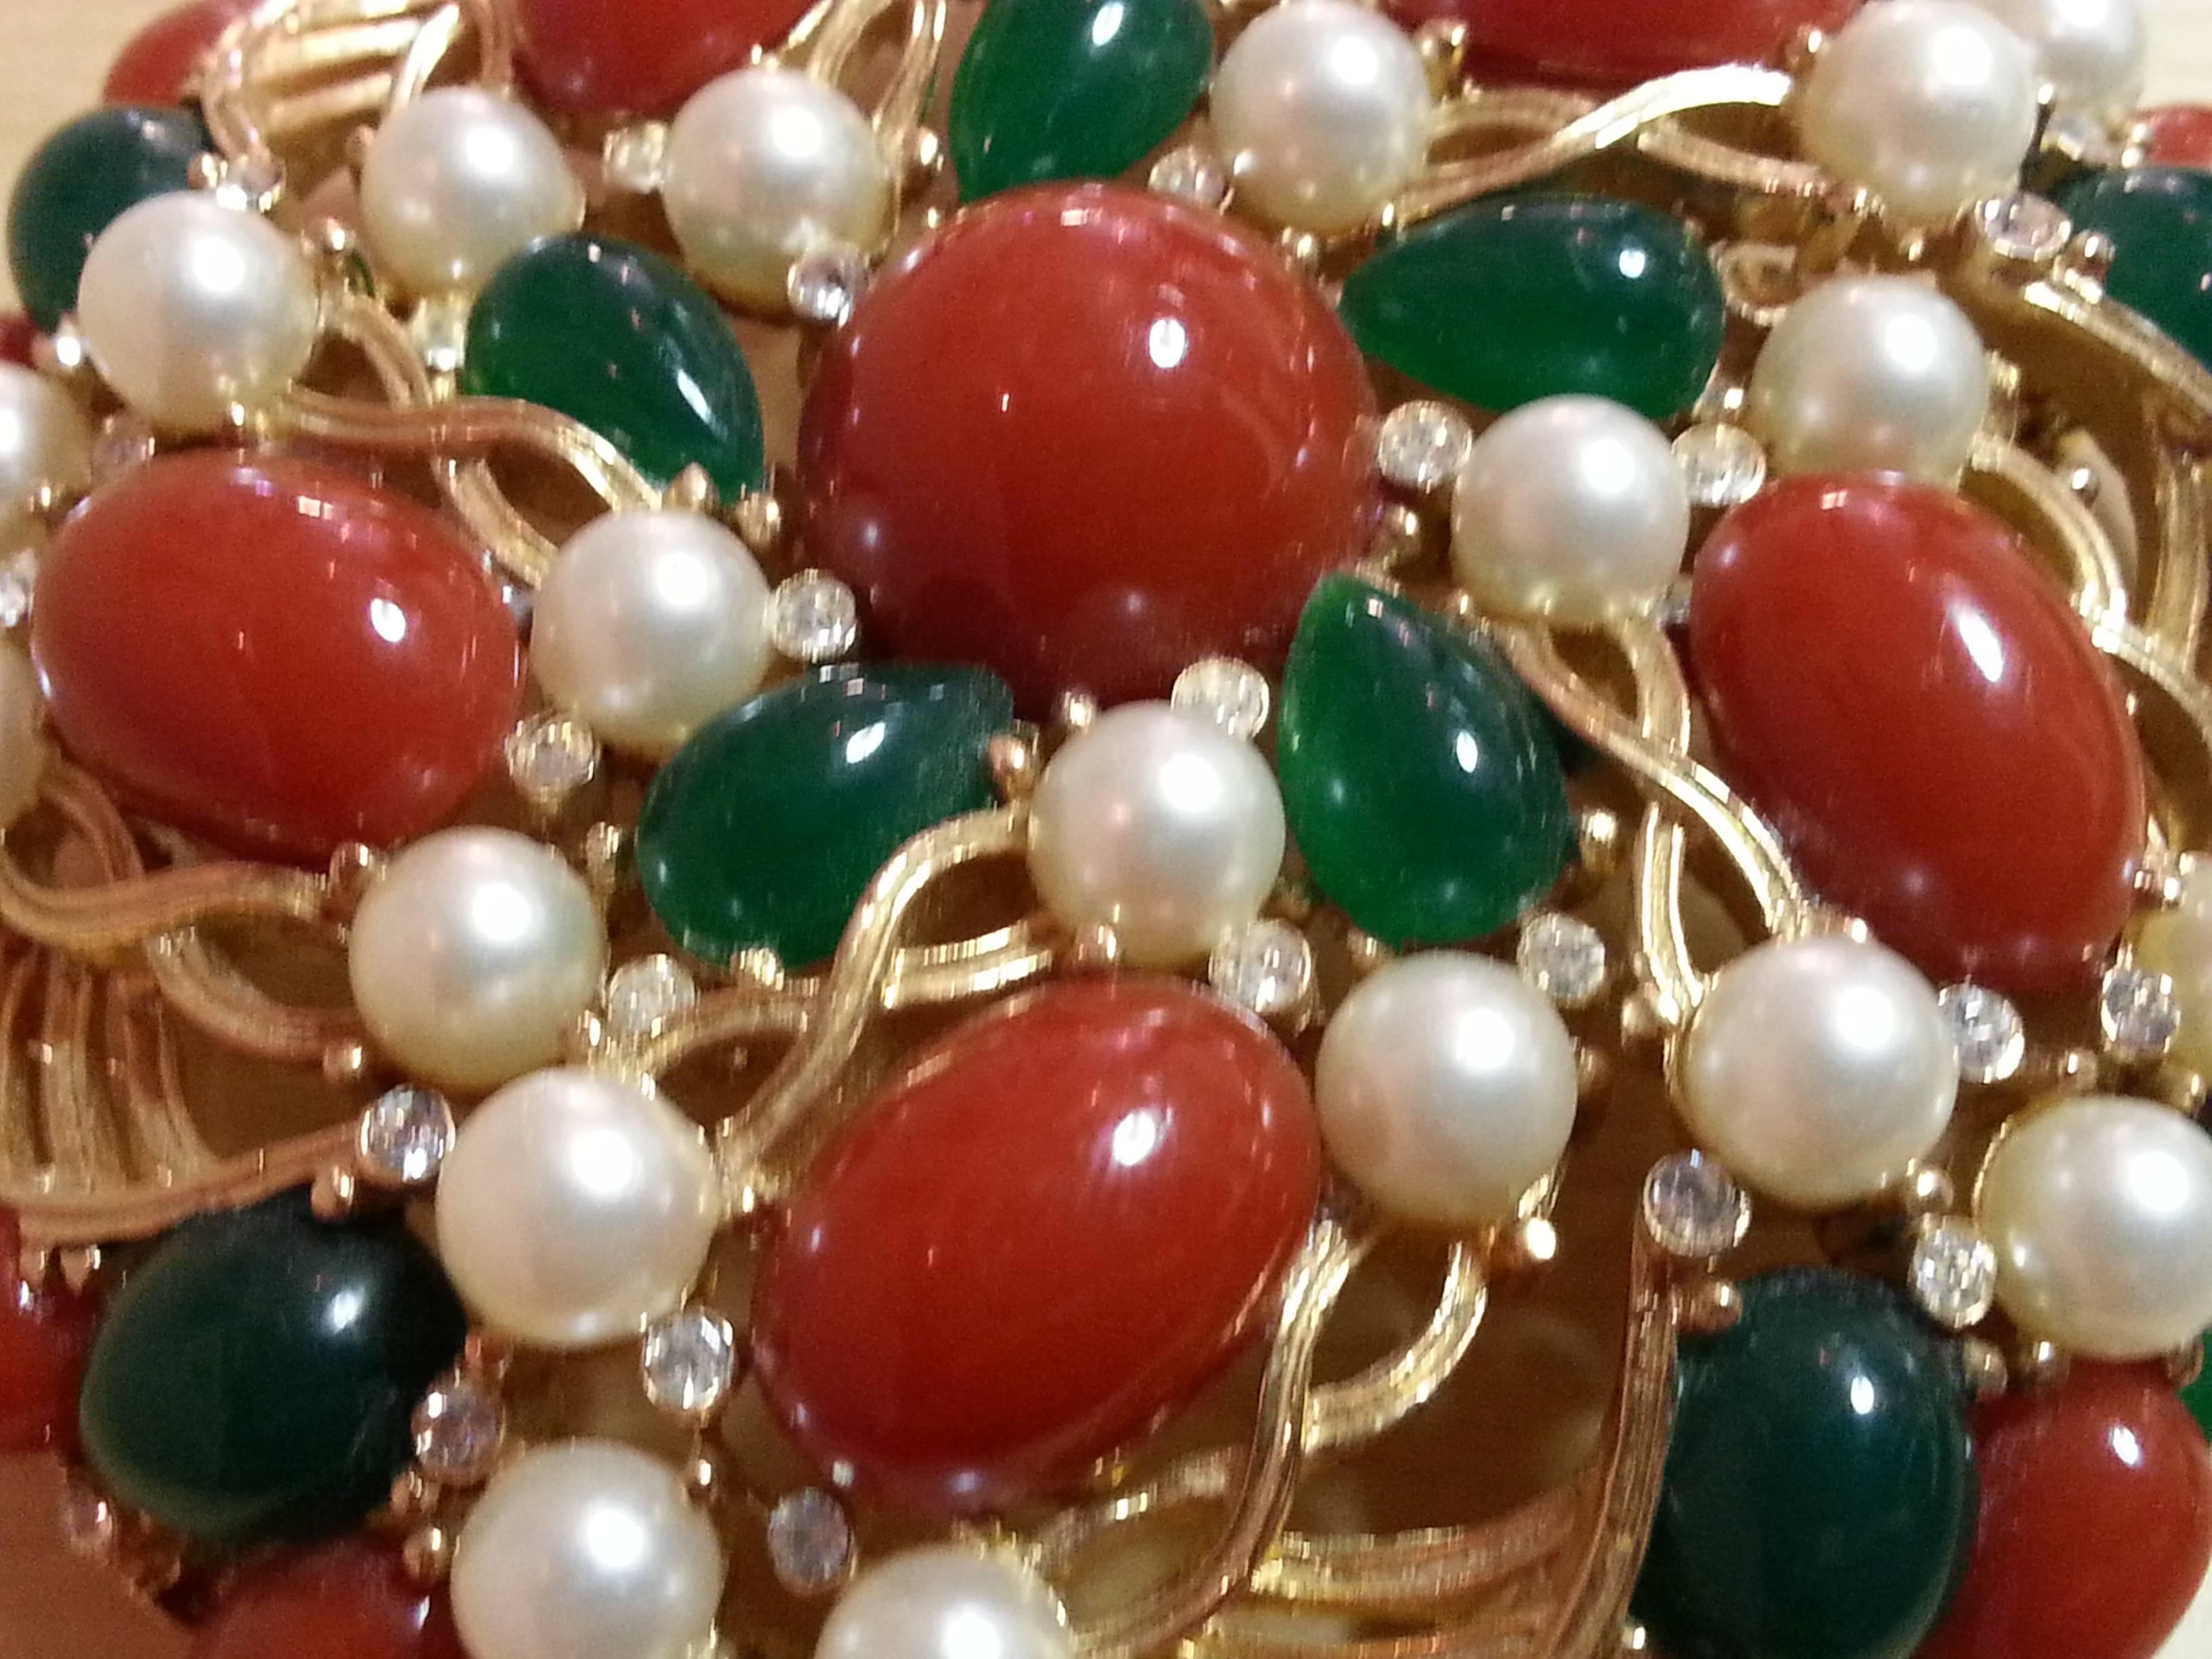 This large brushed goldtone TRIFARI pin dates from the 1960's and incorporates classic aspects of Mogul designed jewelry design in its period format. Flat backed faux emerald and coral cabochons provide rich color and texture in contrast to the